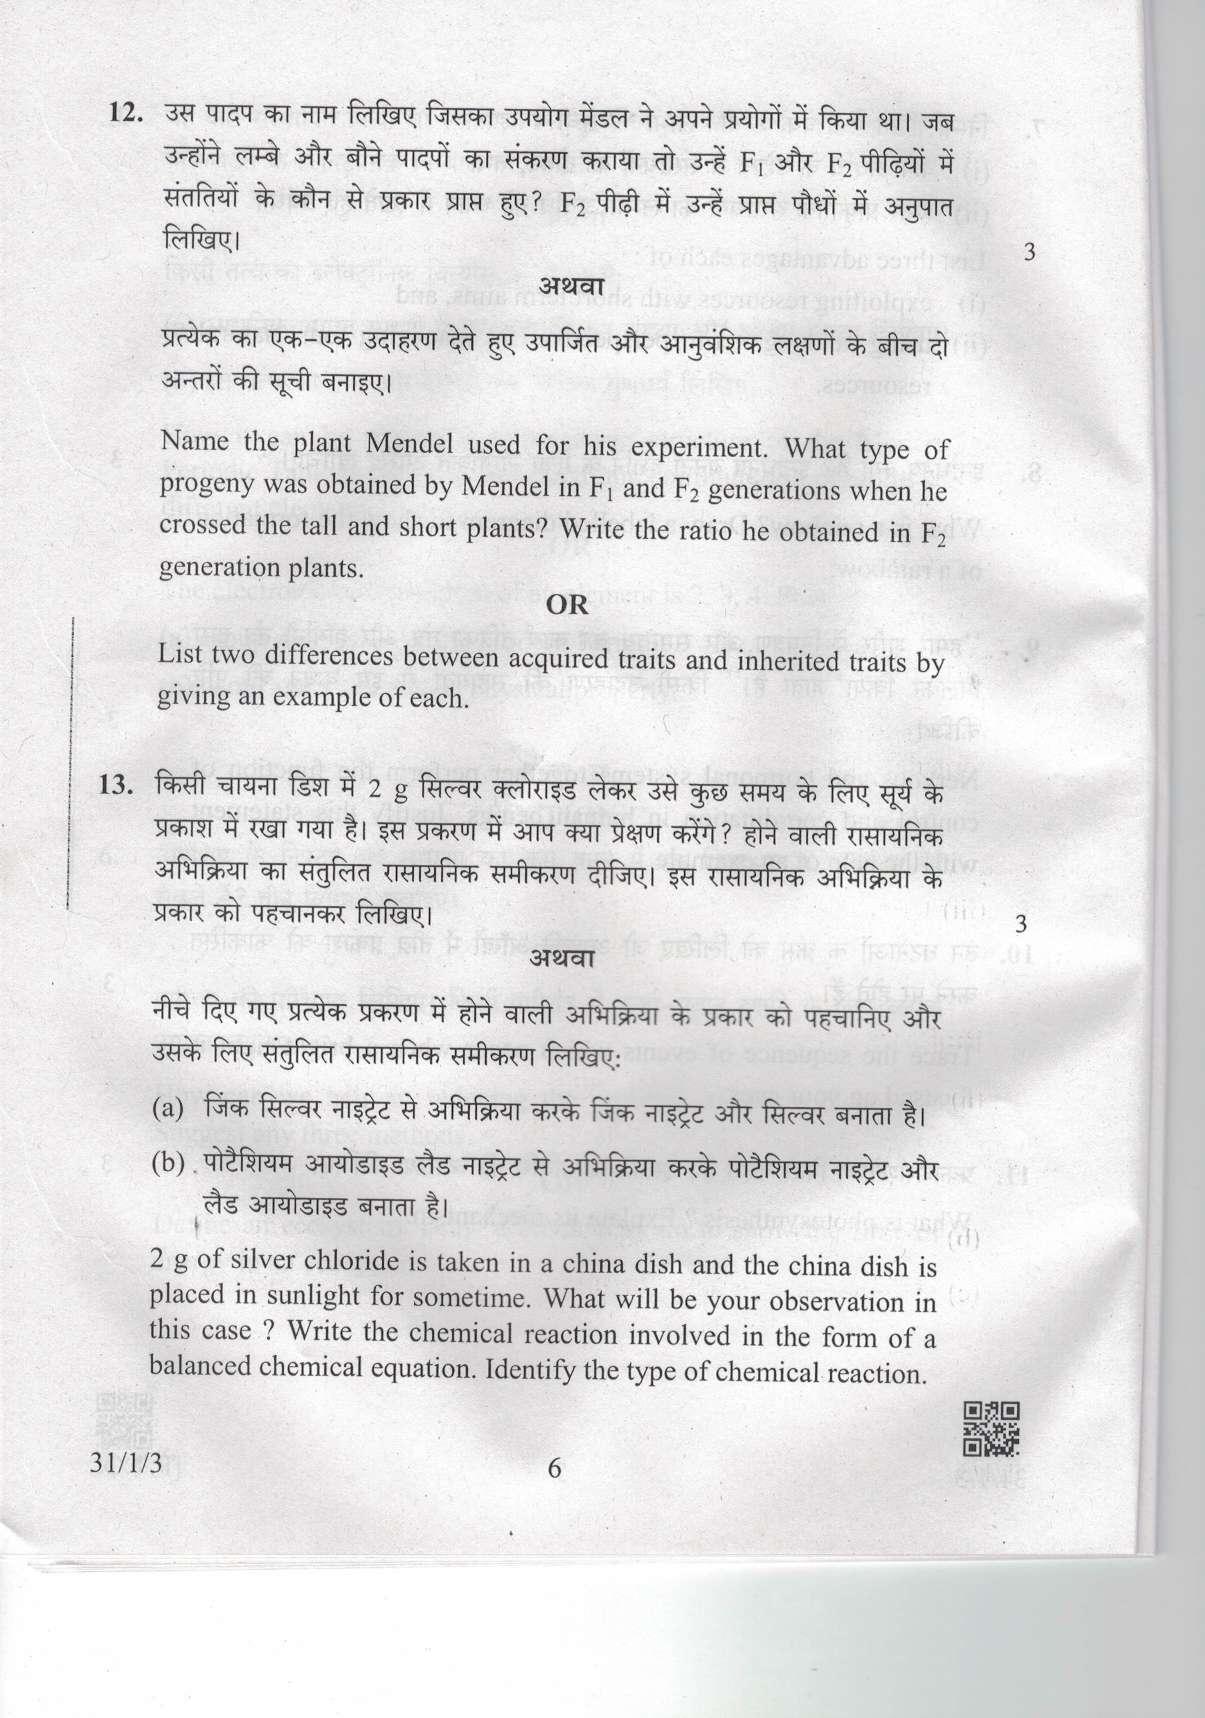 CBSE Class 10 31-1-3 Science 2019 Question Paper - Page 6